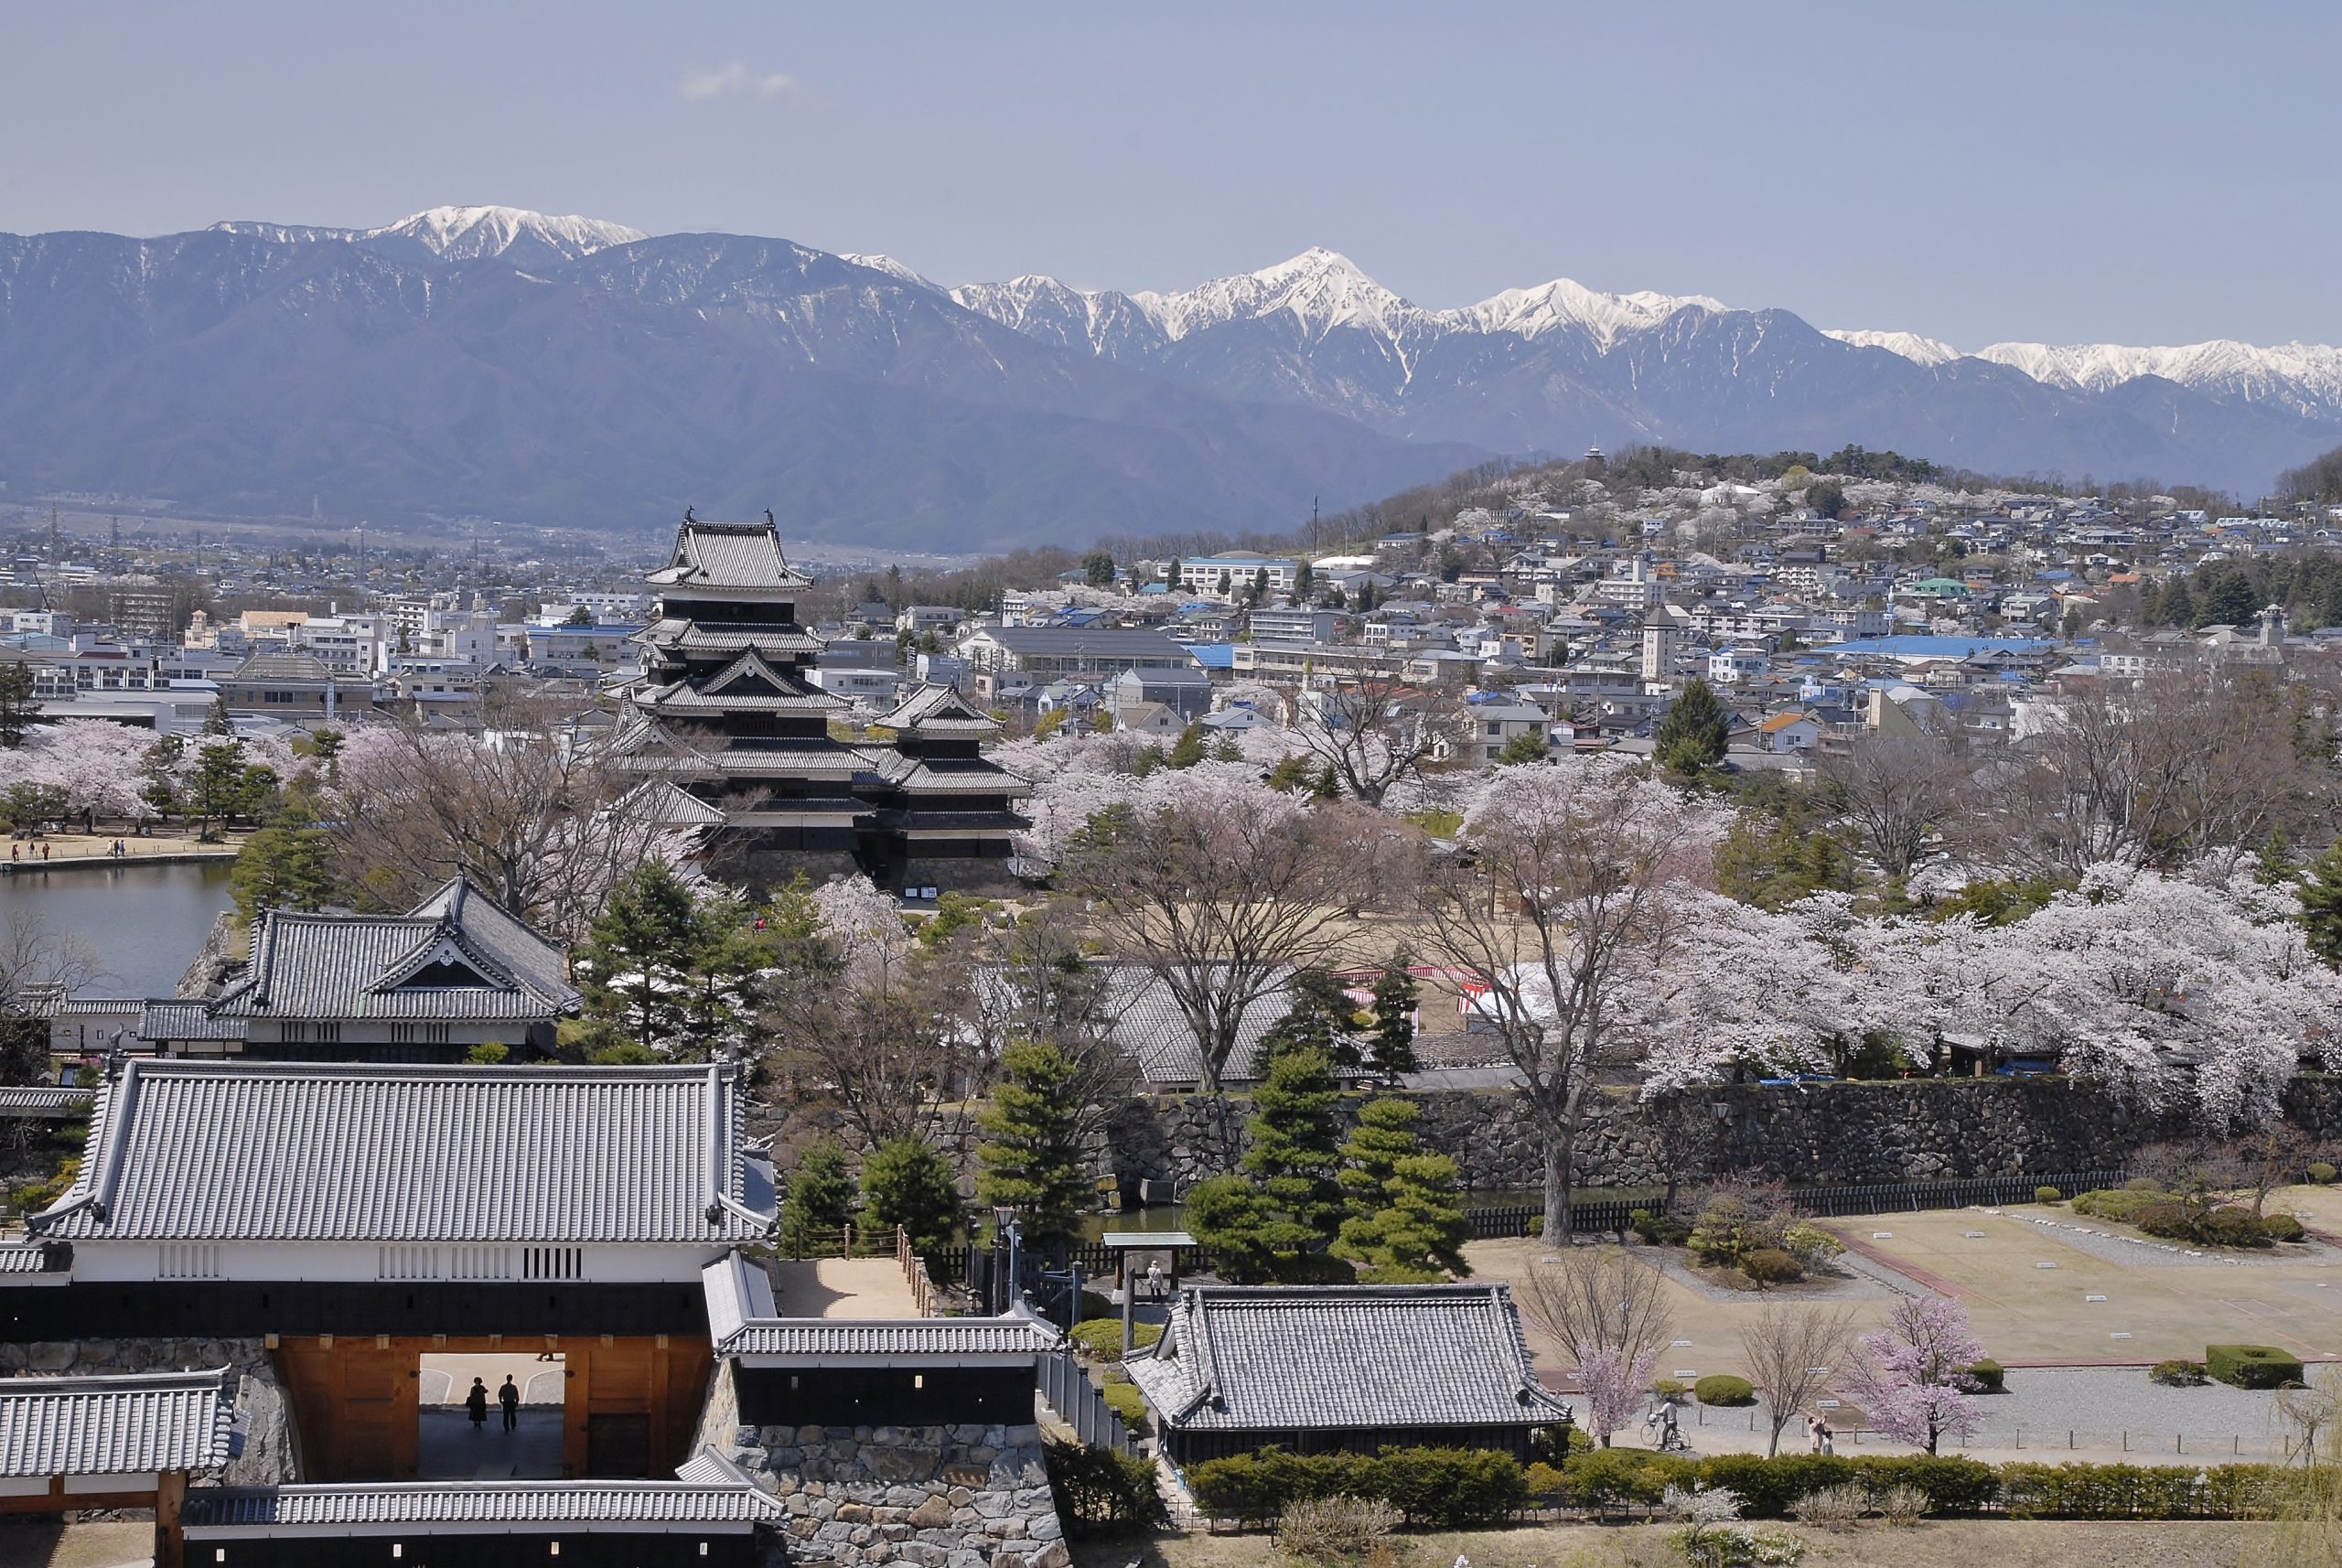 Witness the marvel of Matsumoto Castle, a National Treasure in Nagano.